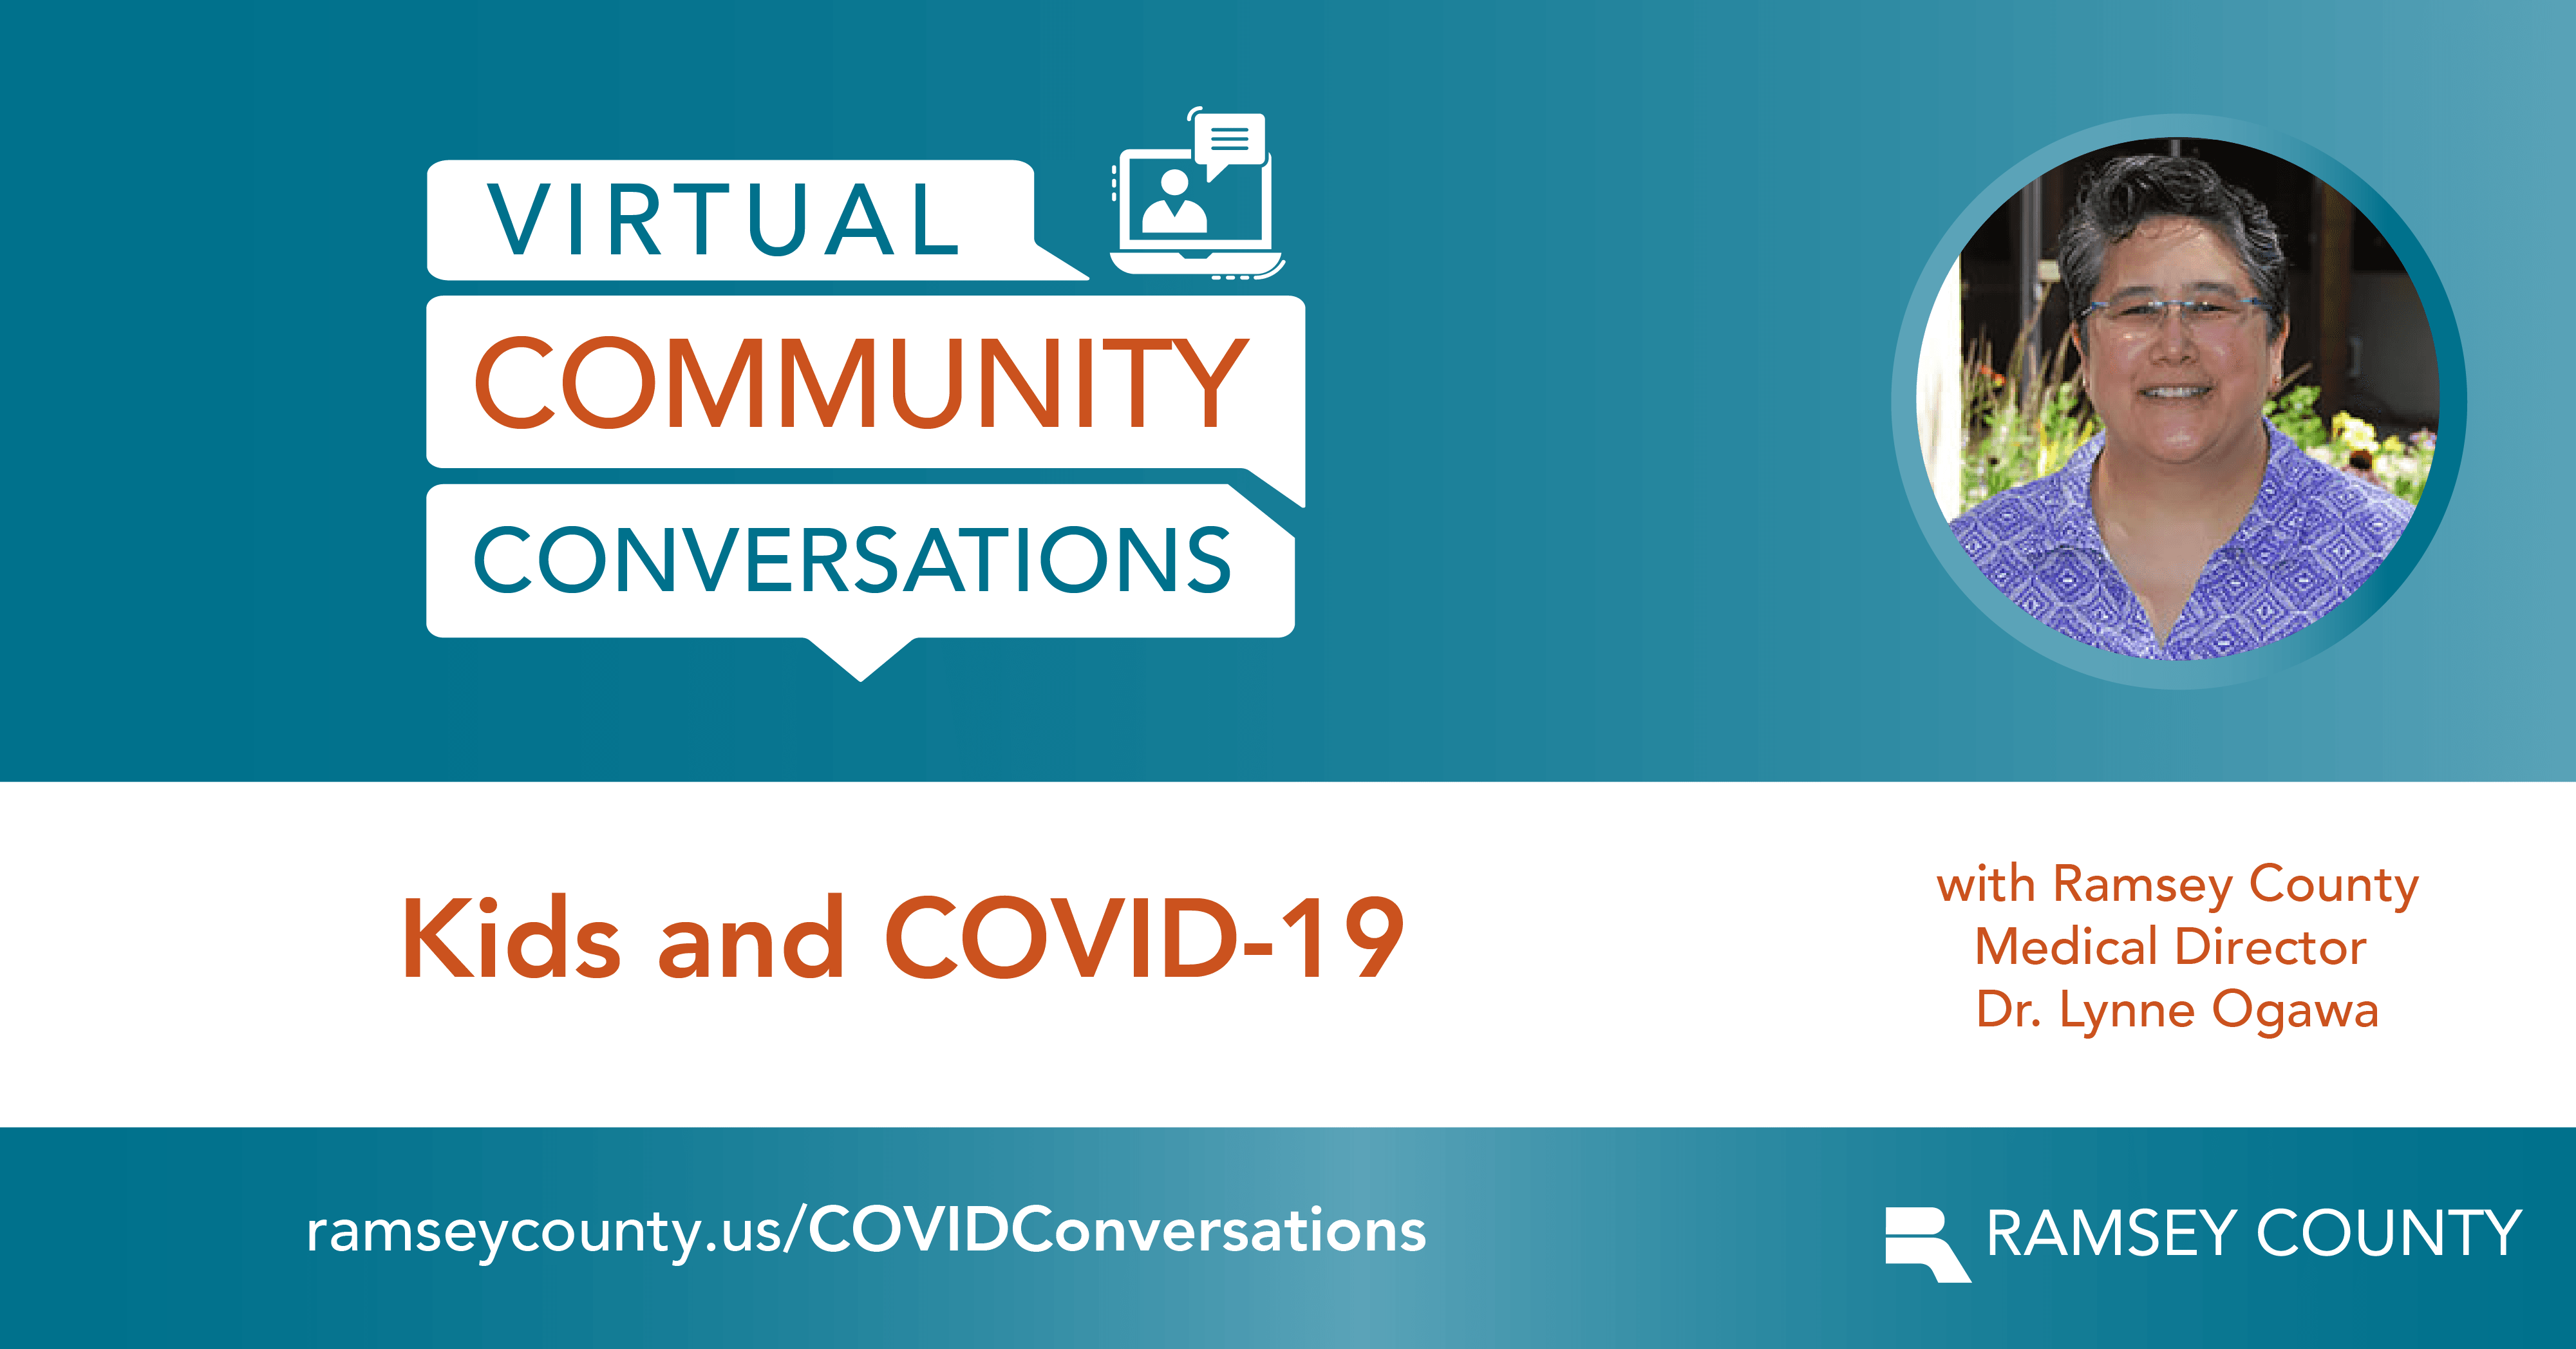 St. Paul - Ramsey County Public Health to Host COVID-19 Virtual Community Conversation with Dr. Lynne Ogawa